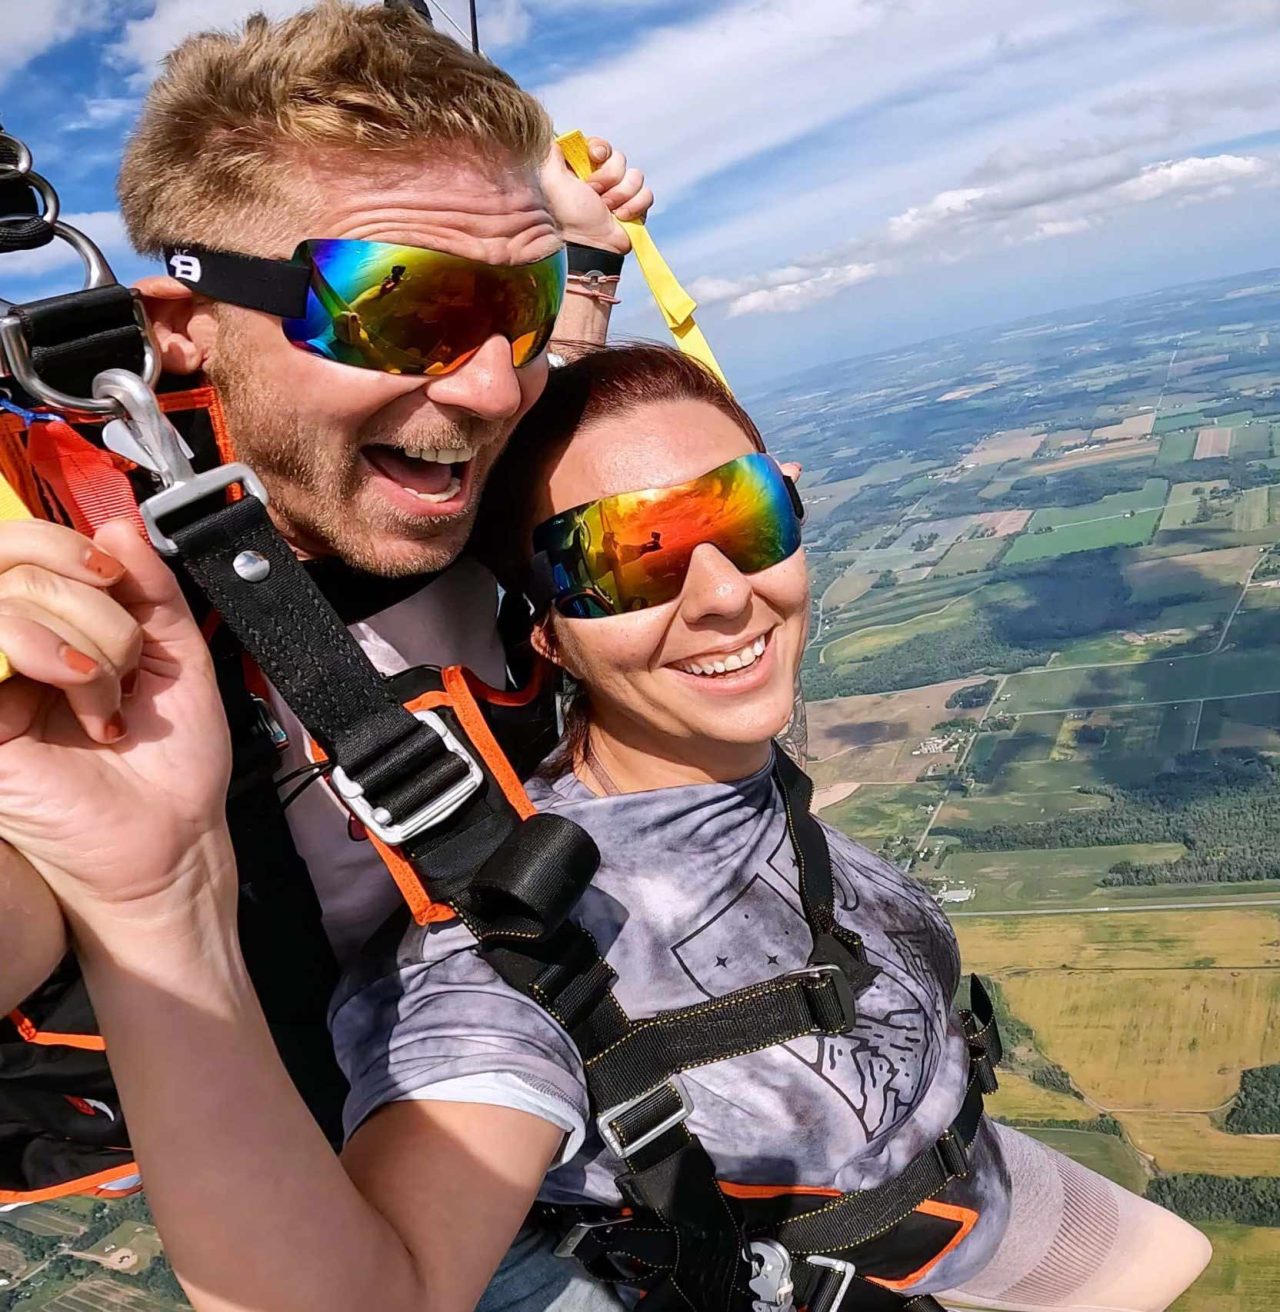 Male and female tandem skydiving pair with rainbow reflective goggles smiling under canopy.